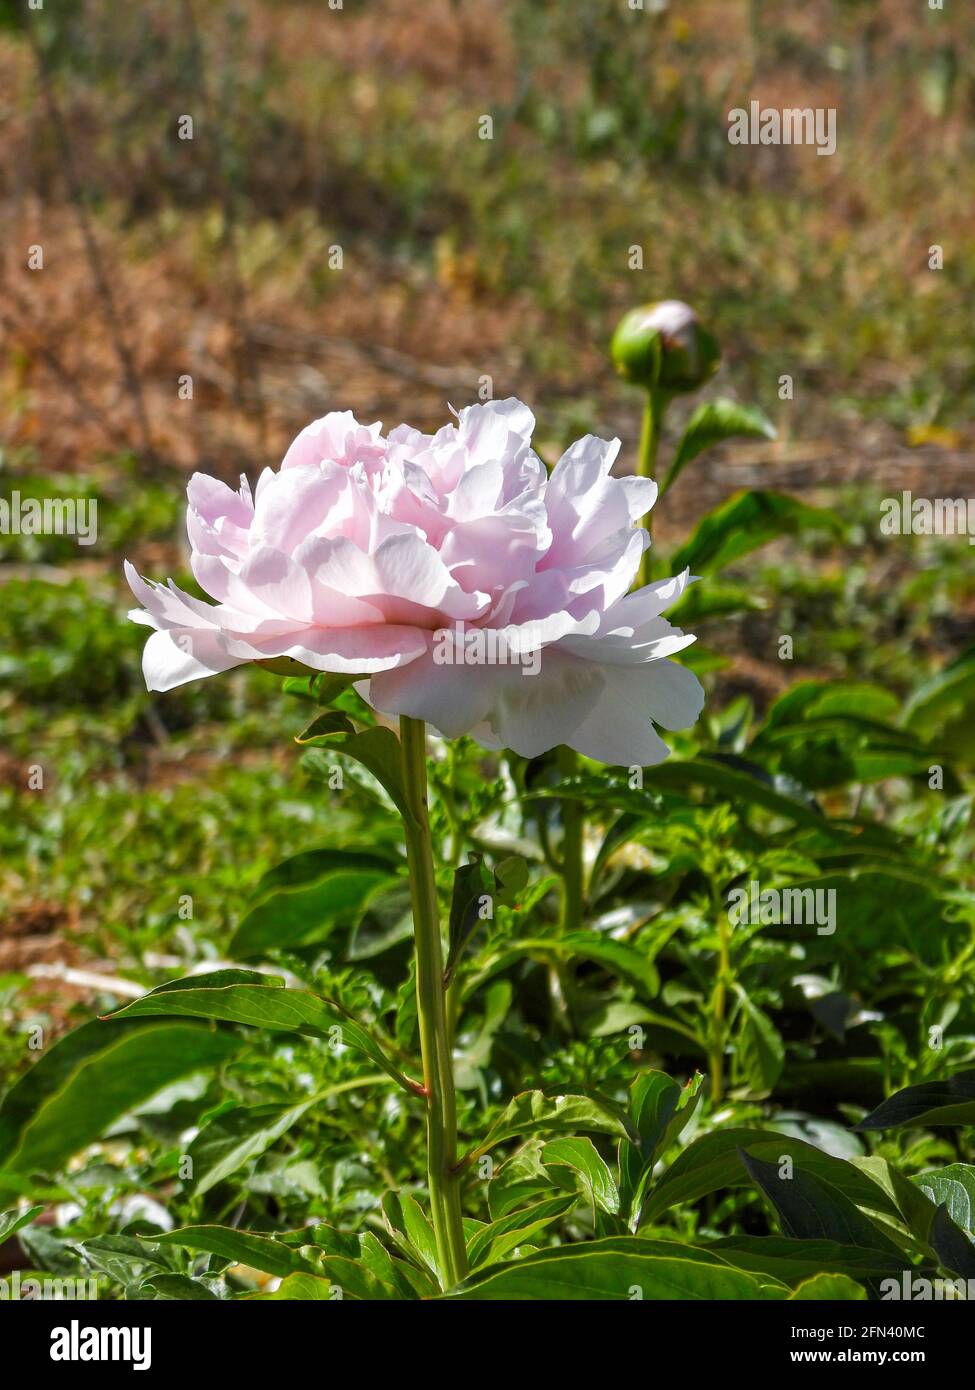 Close-up of pale pink peony head against green foliage background Stock Photo